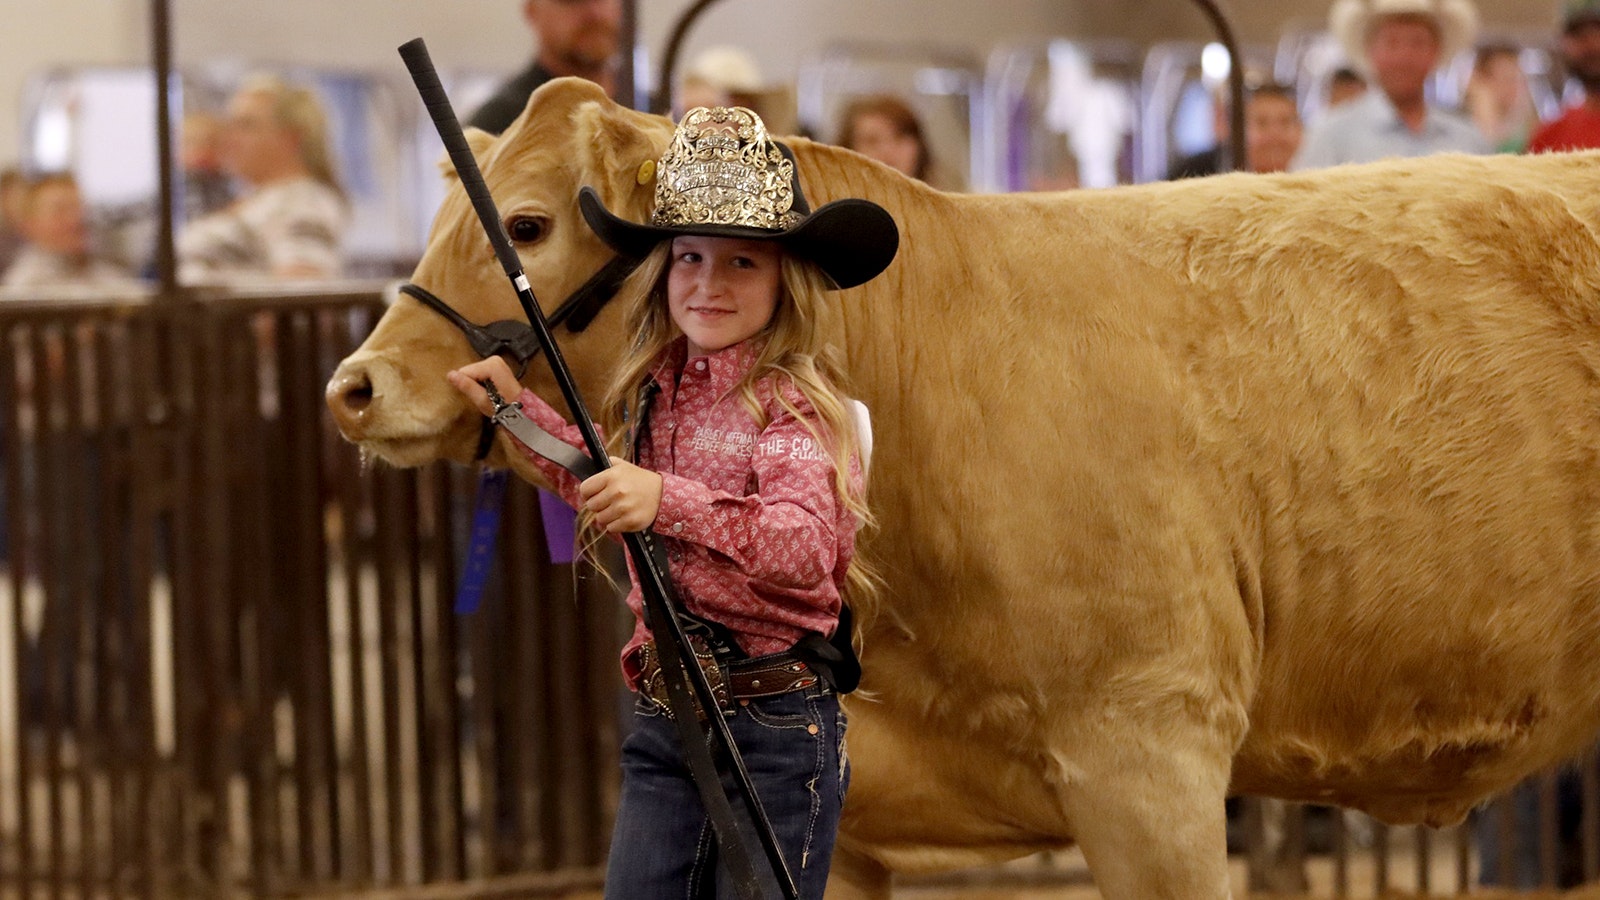 She raised a good-looking critter for the Sublette County Fair.